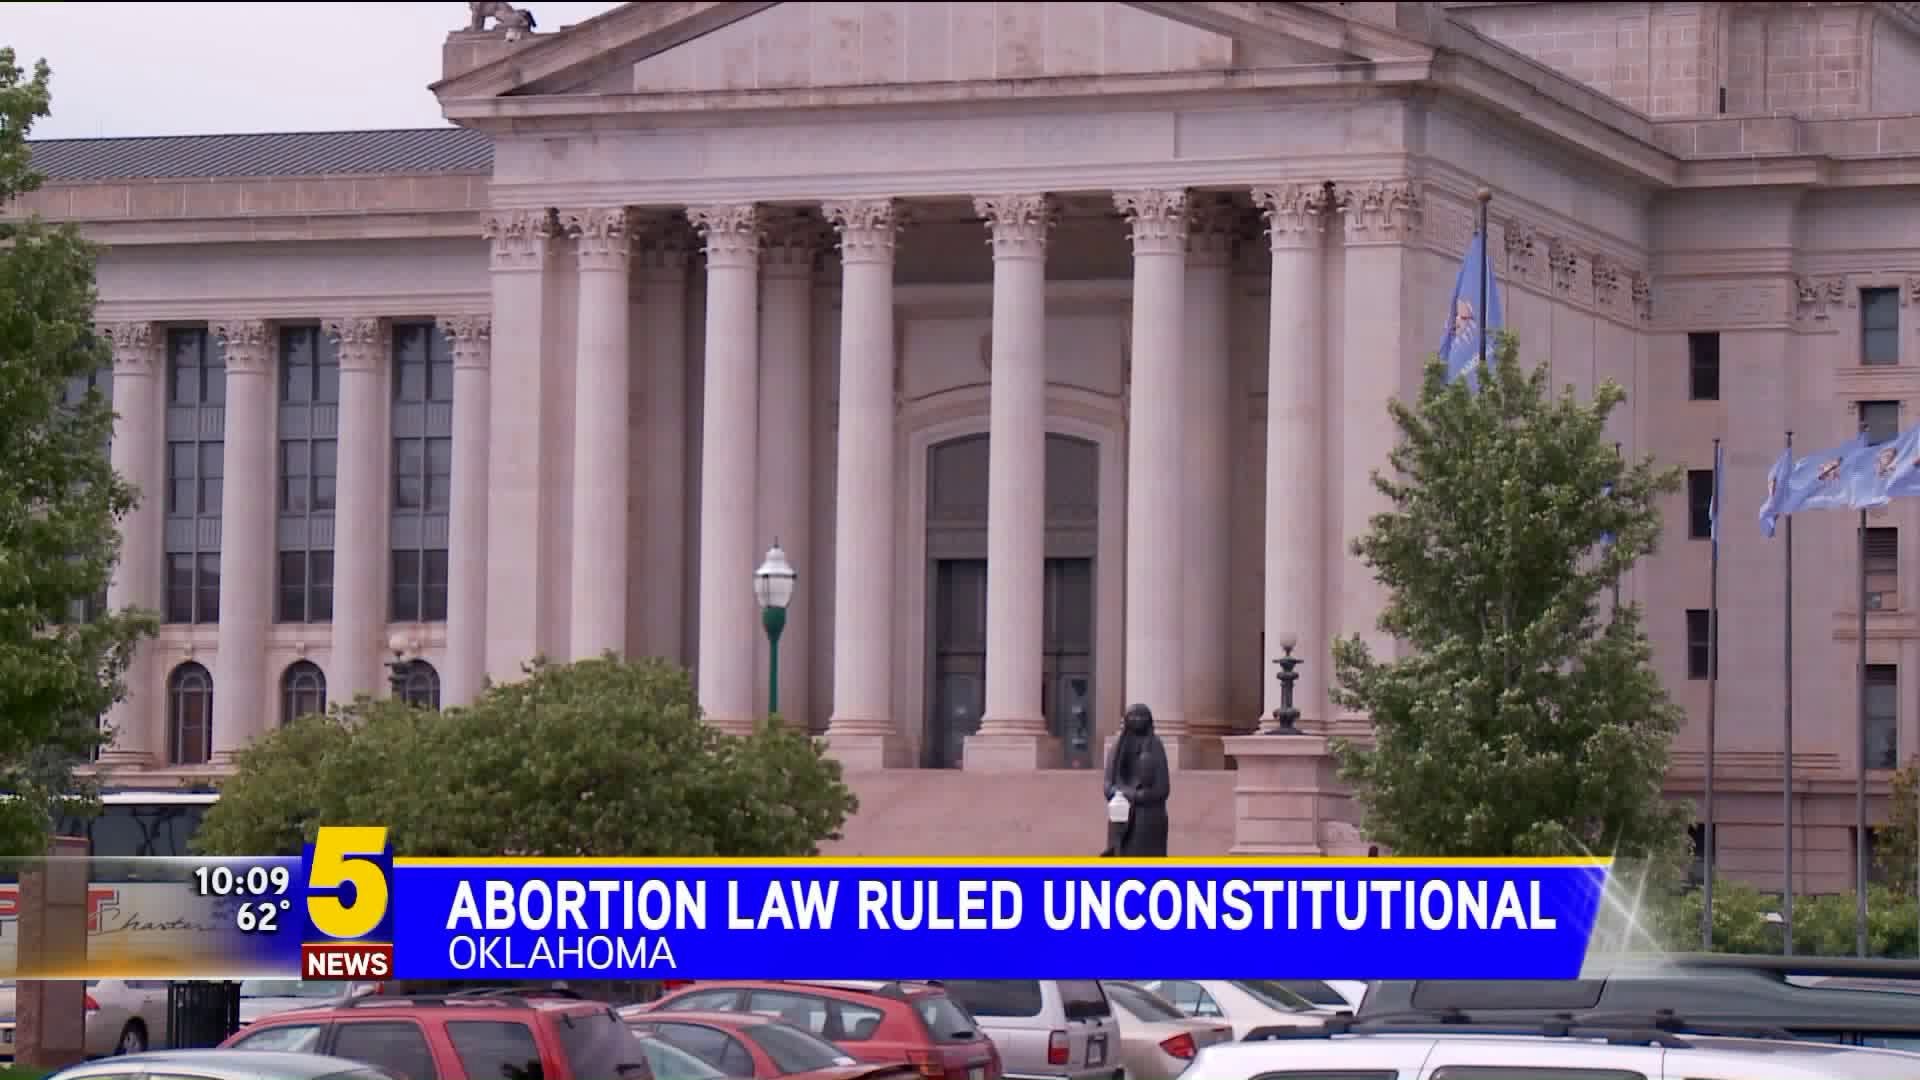 Oklahoma Abortion Law Ruled Unconstitutional